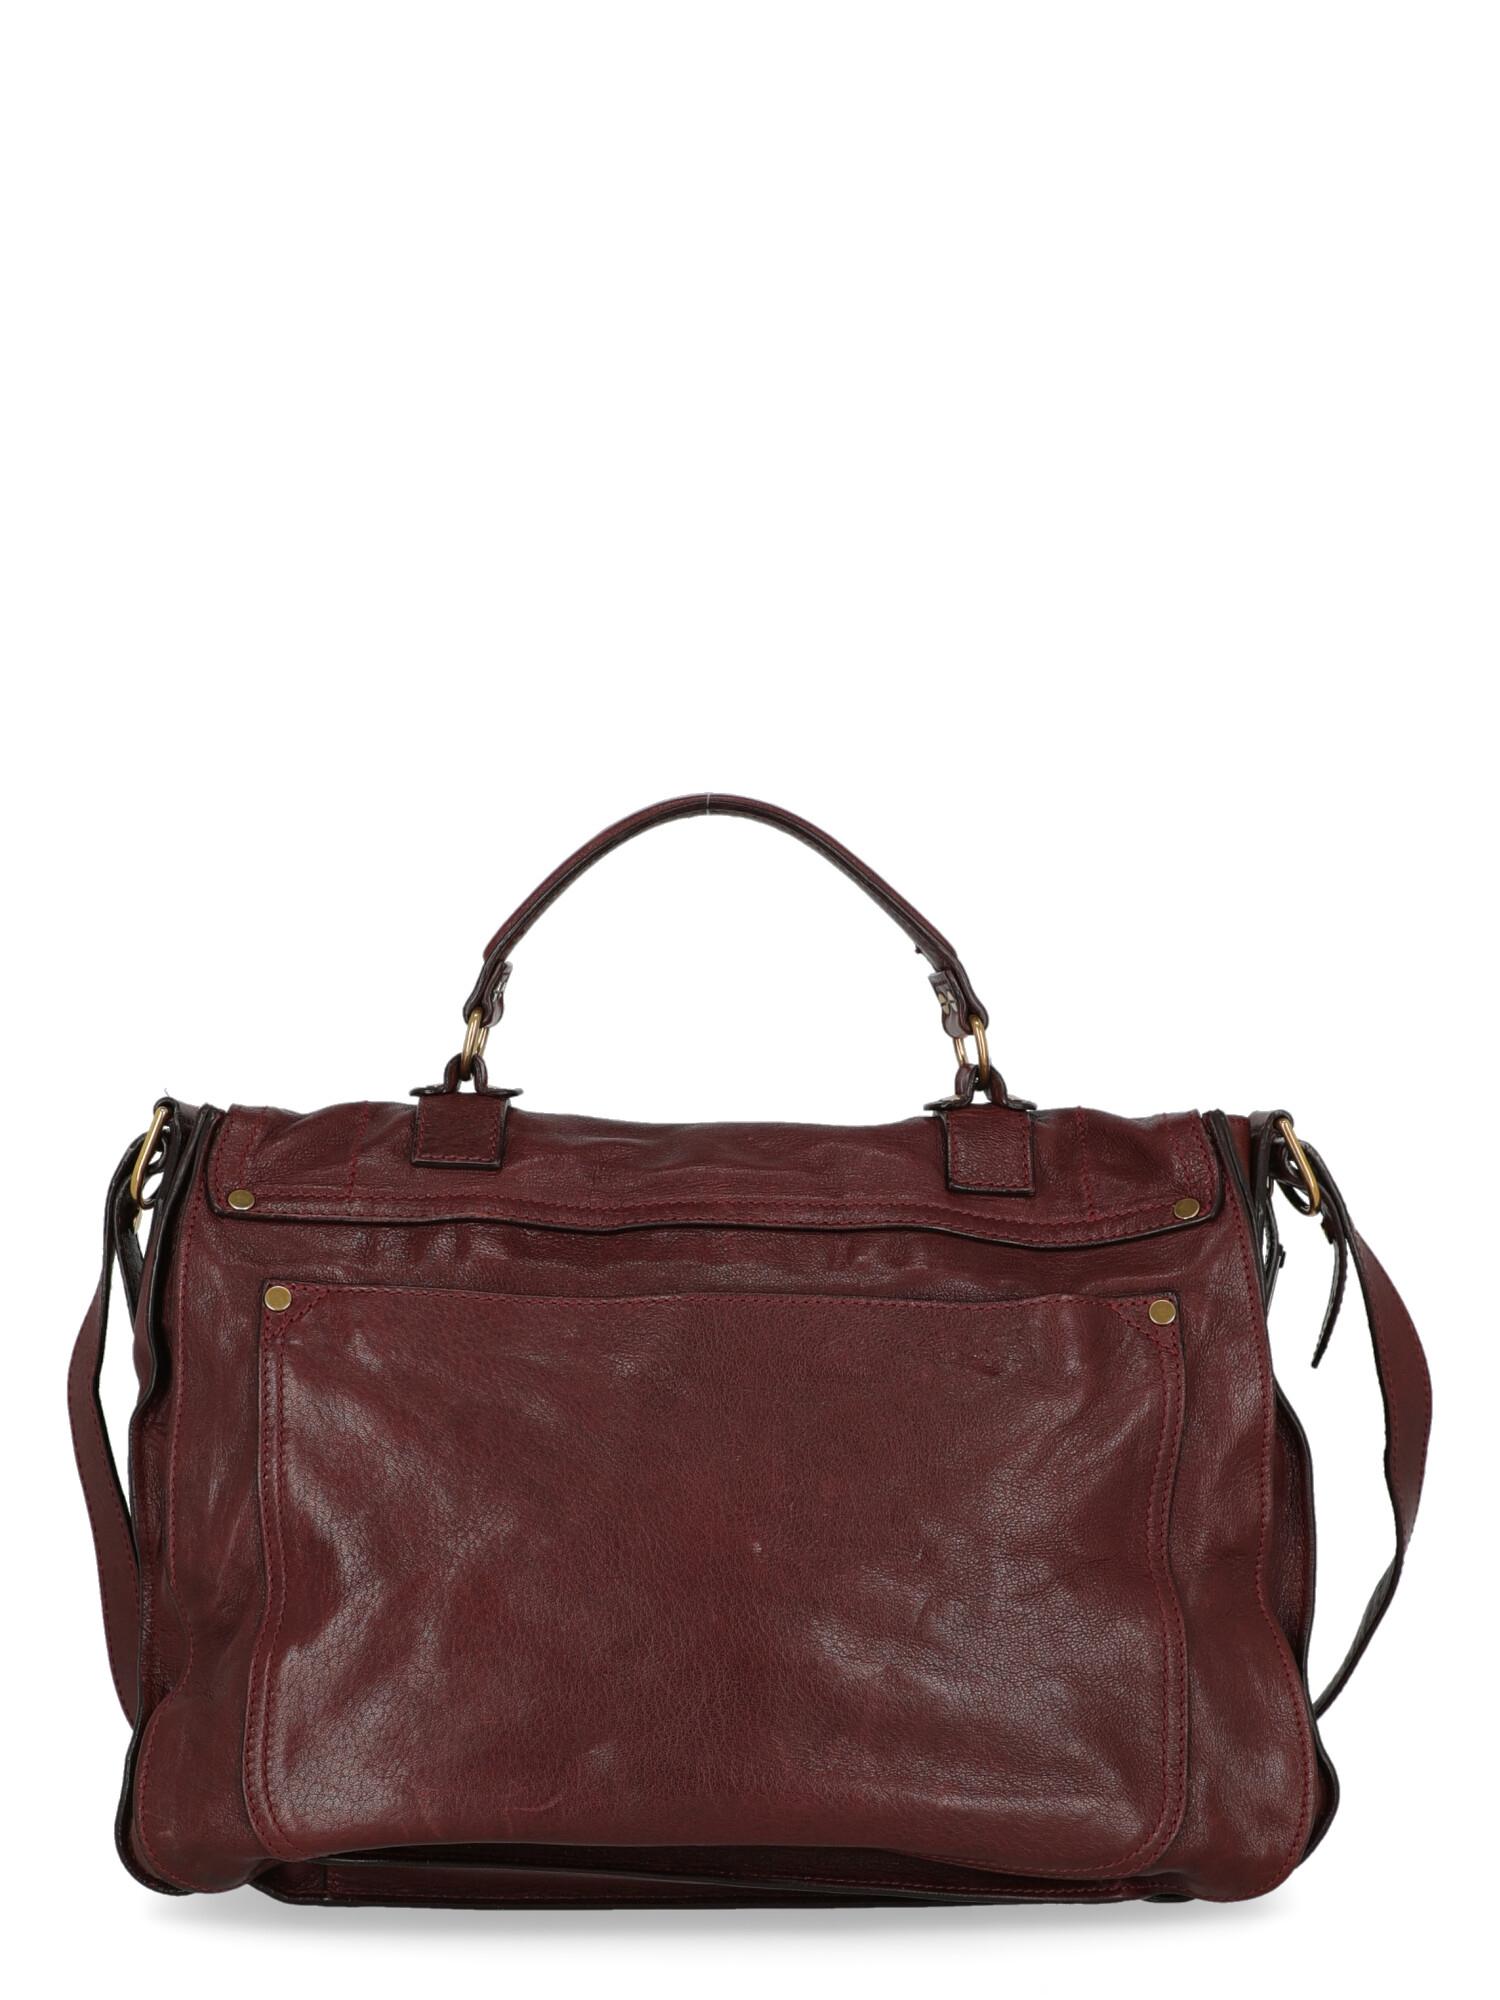 Proenza Schouler Women  Shoulder bags Ps1 Burgundy Leather In Good Condition For Sale In Milan, IT